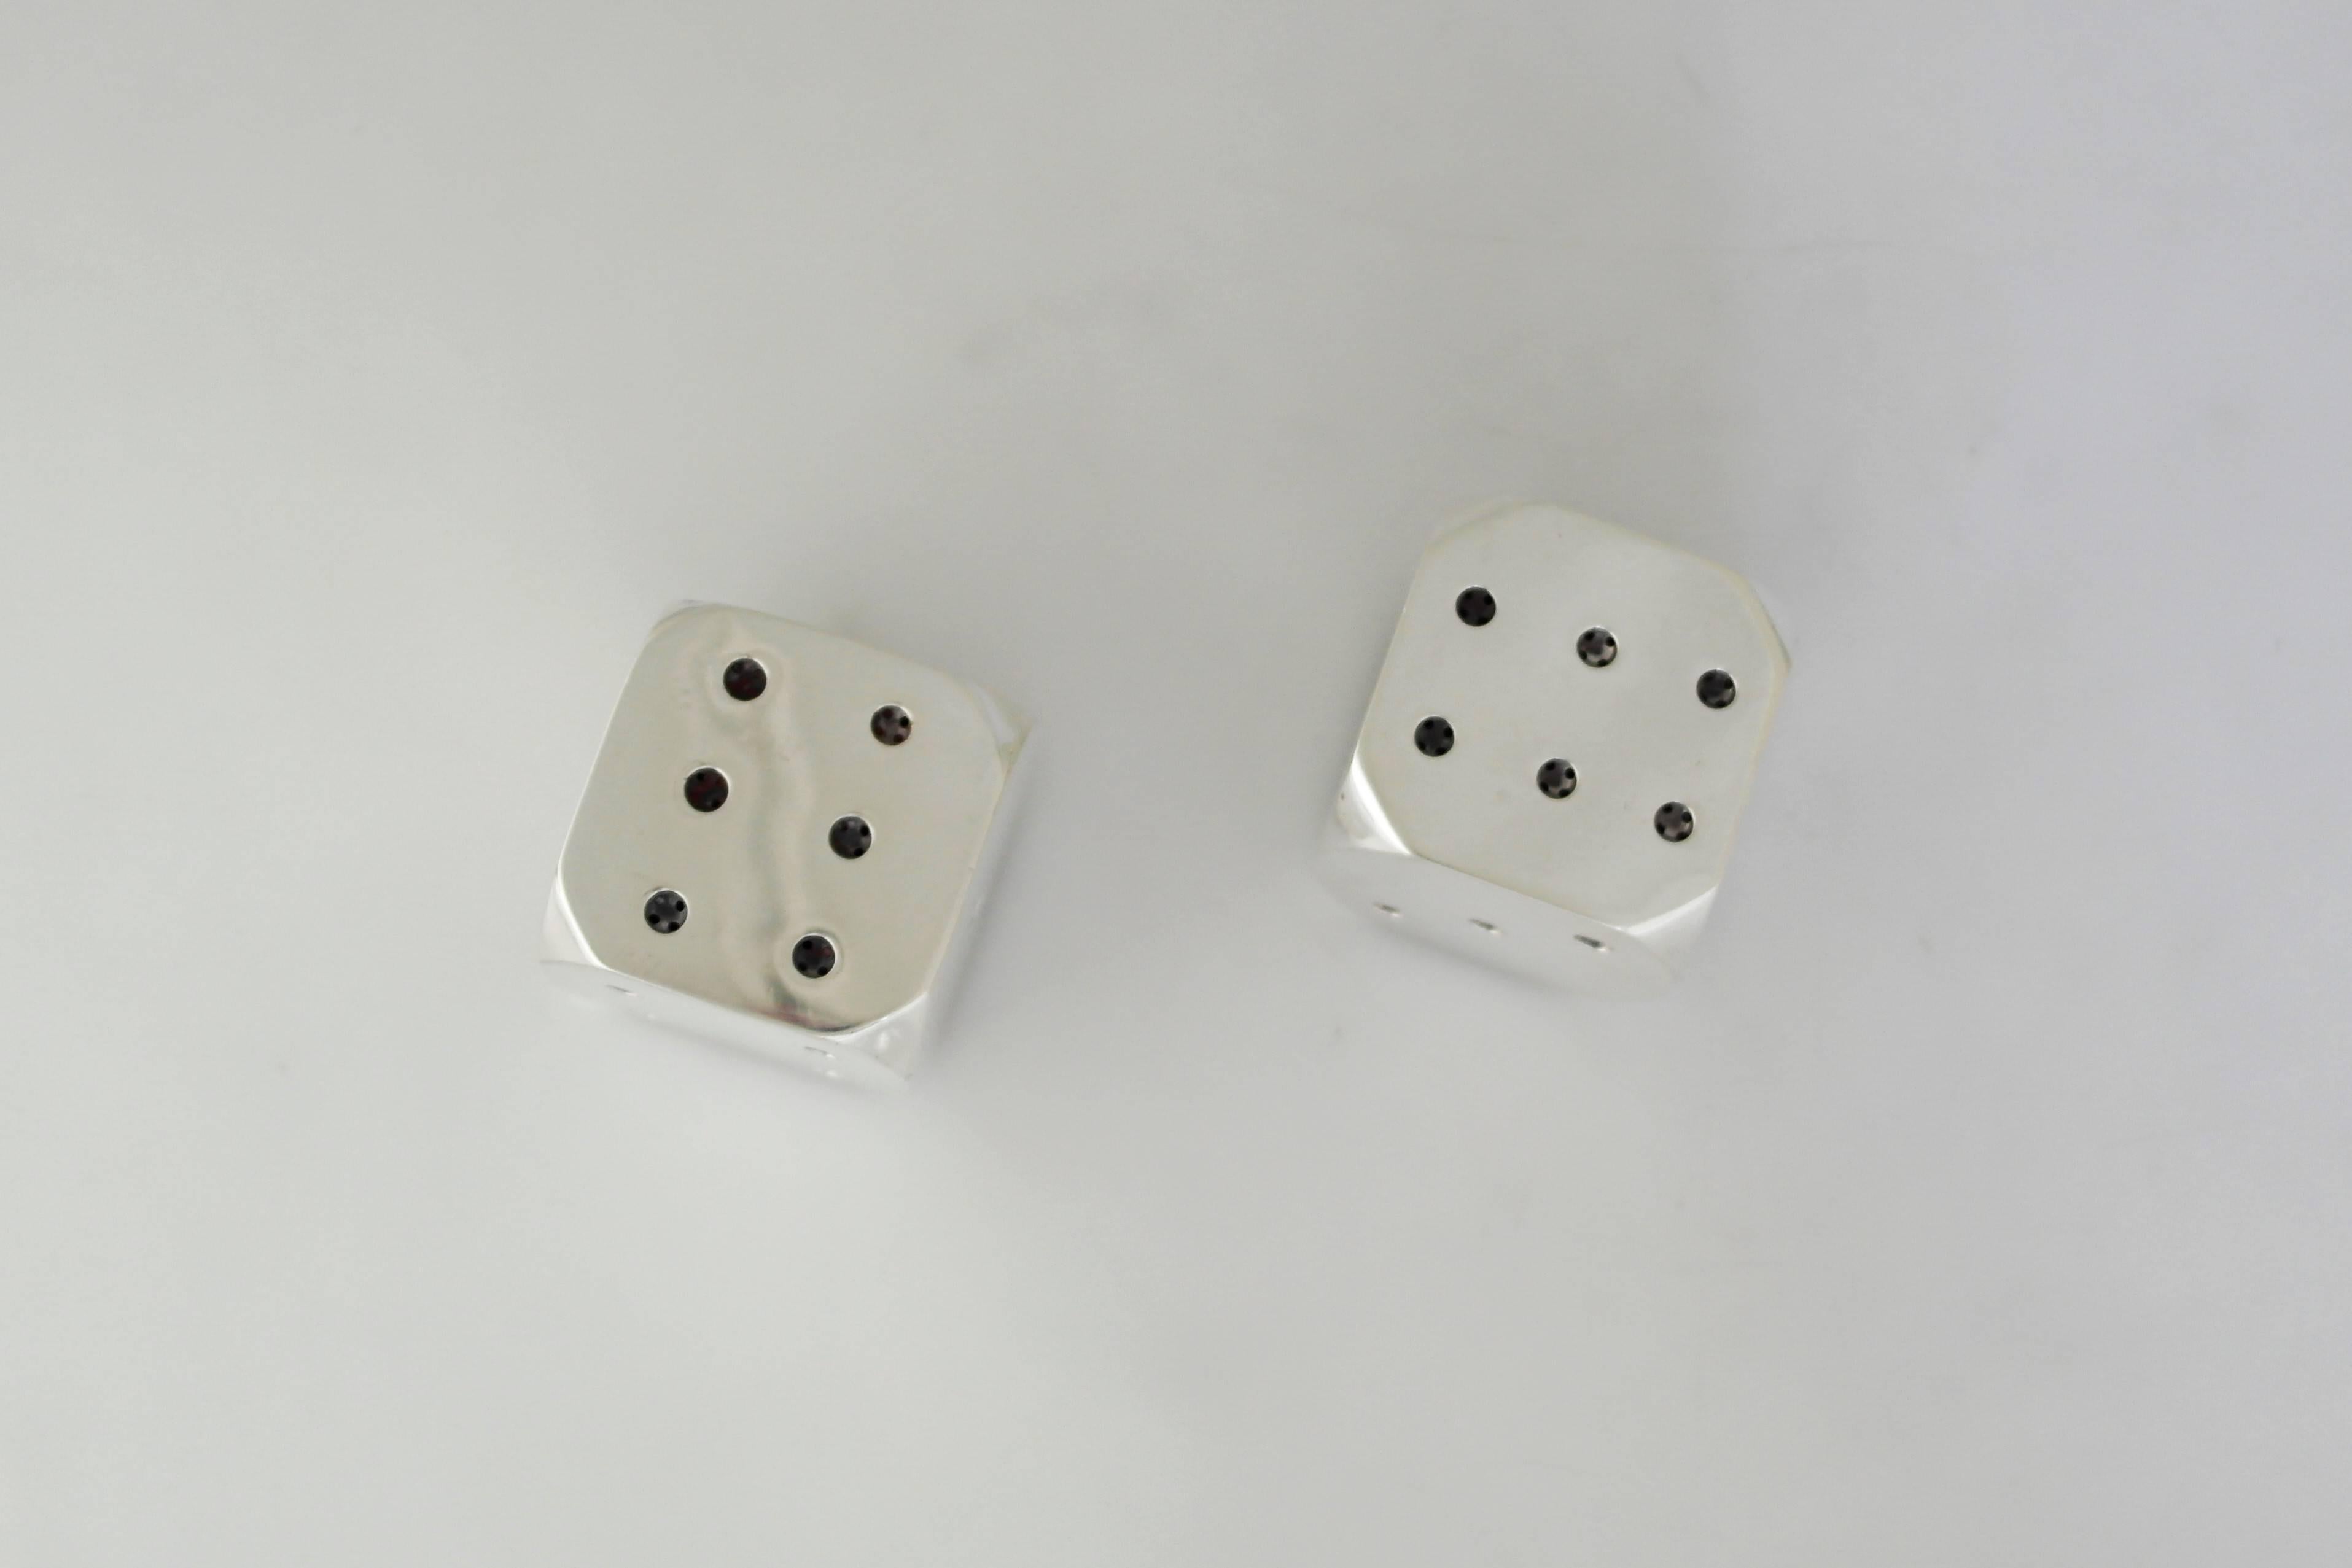 dice salt and pepper shakers